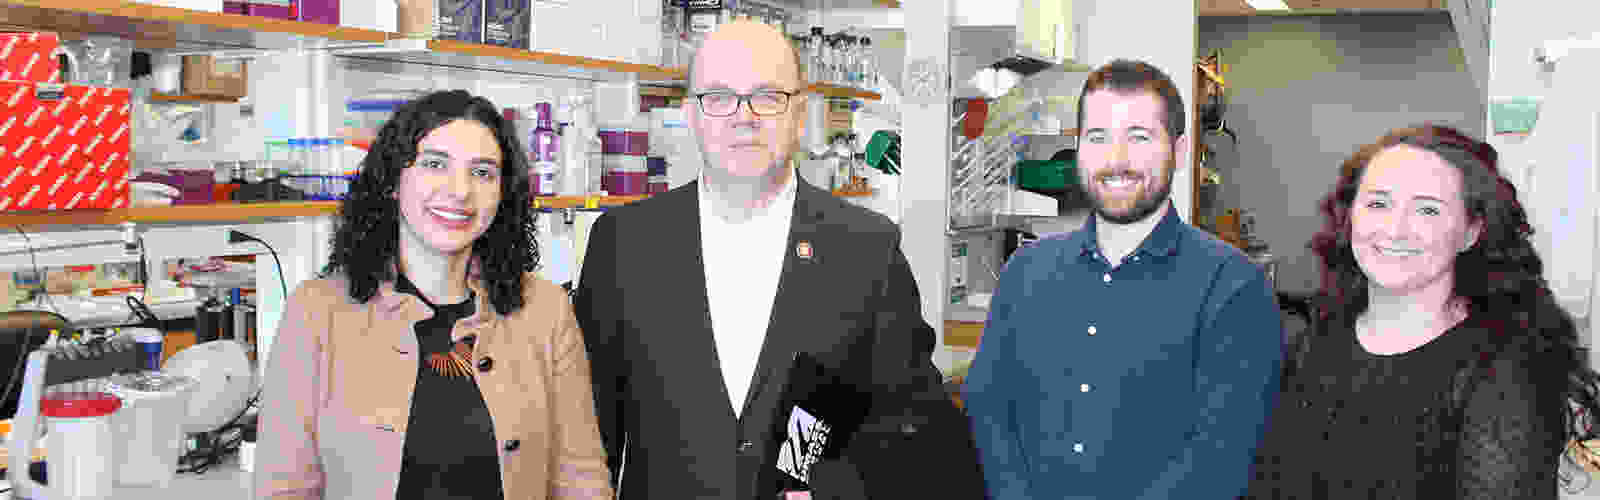 The Congressman Jim McGovern paying a visit to our lab